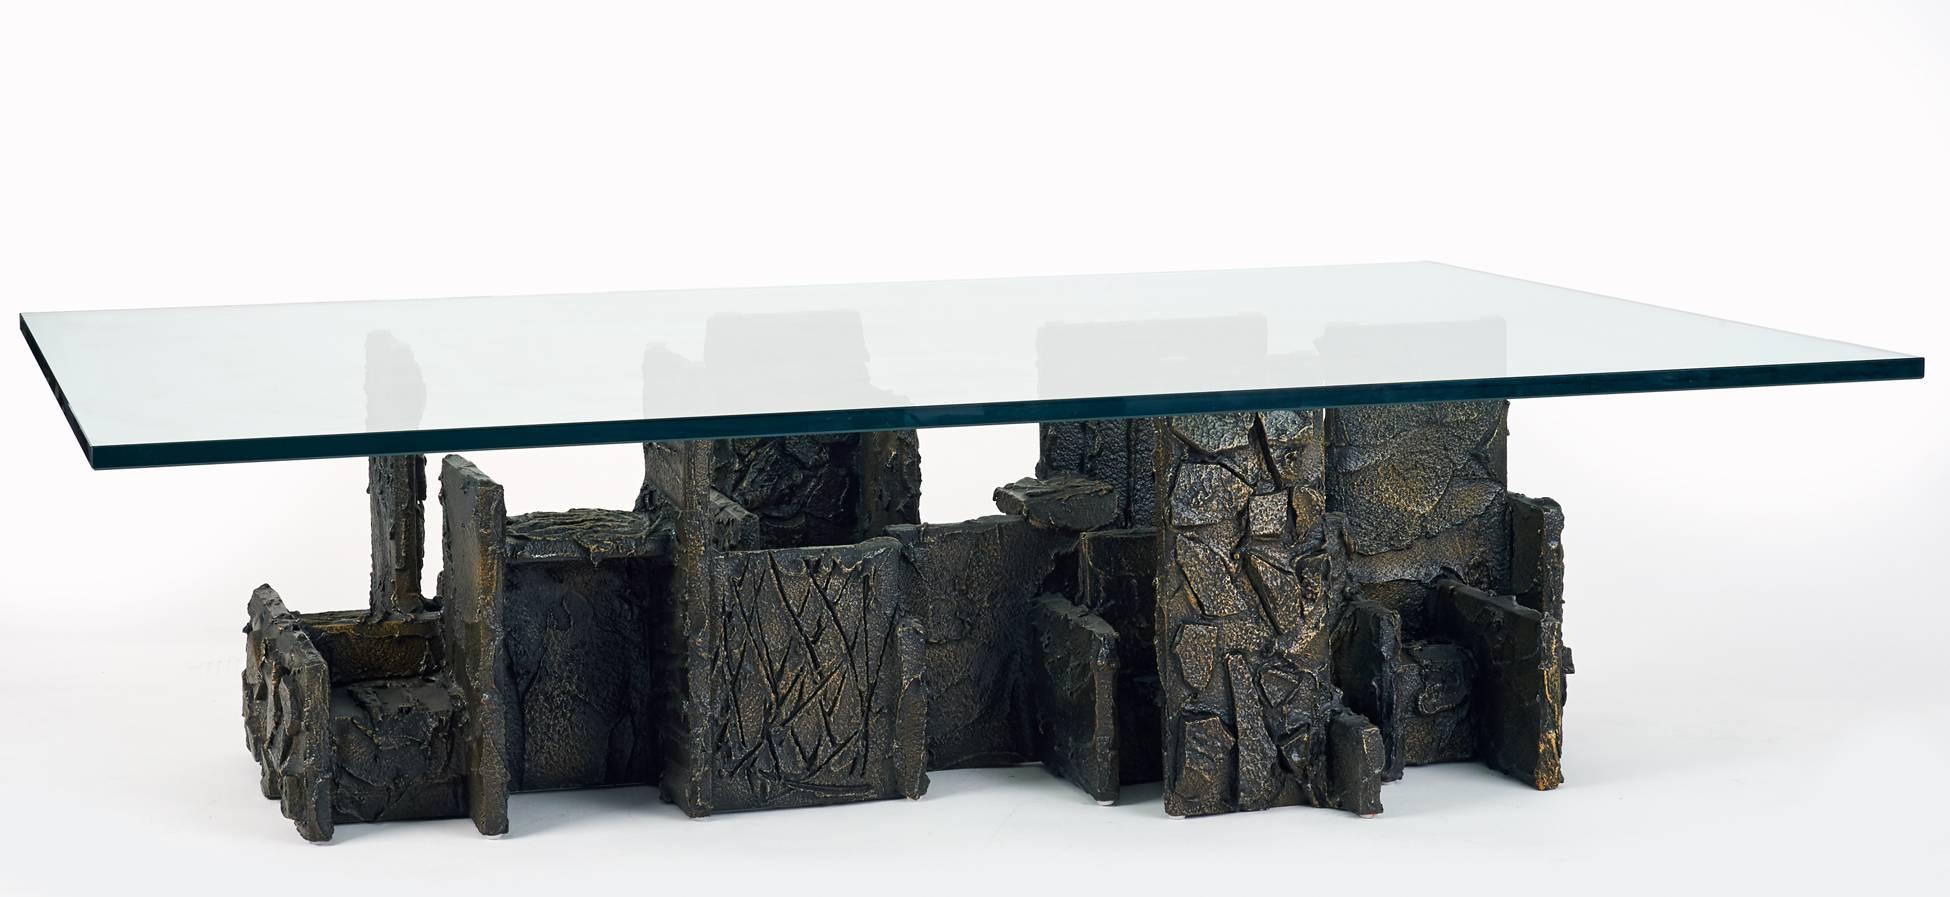 Brutalist Paul Evans Monumental Sculpted Bronze and Glass Coffee Table, Signed, 1974 For Sale